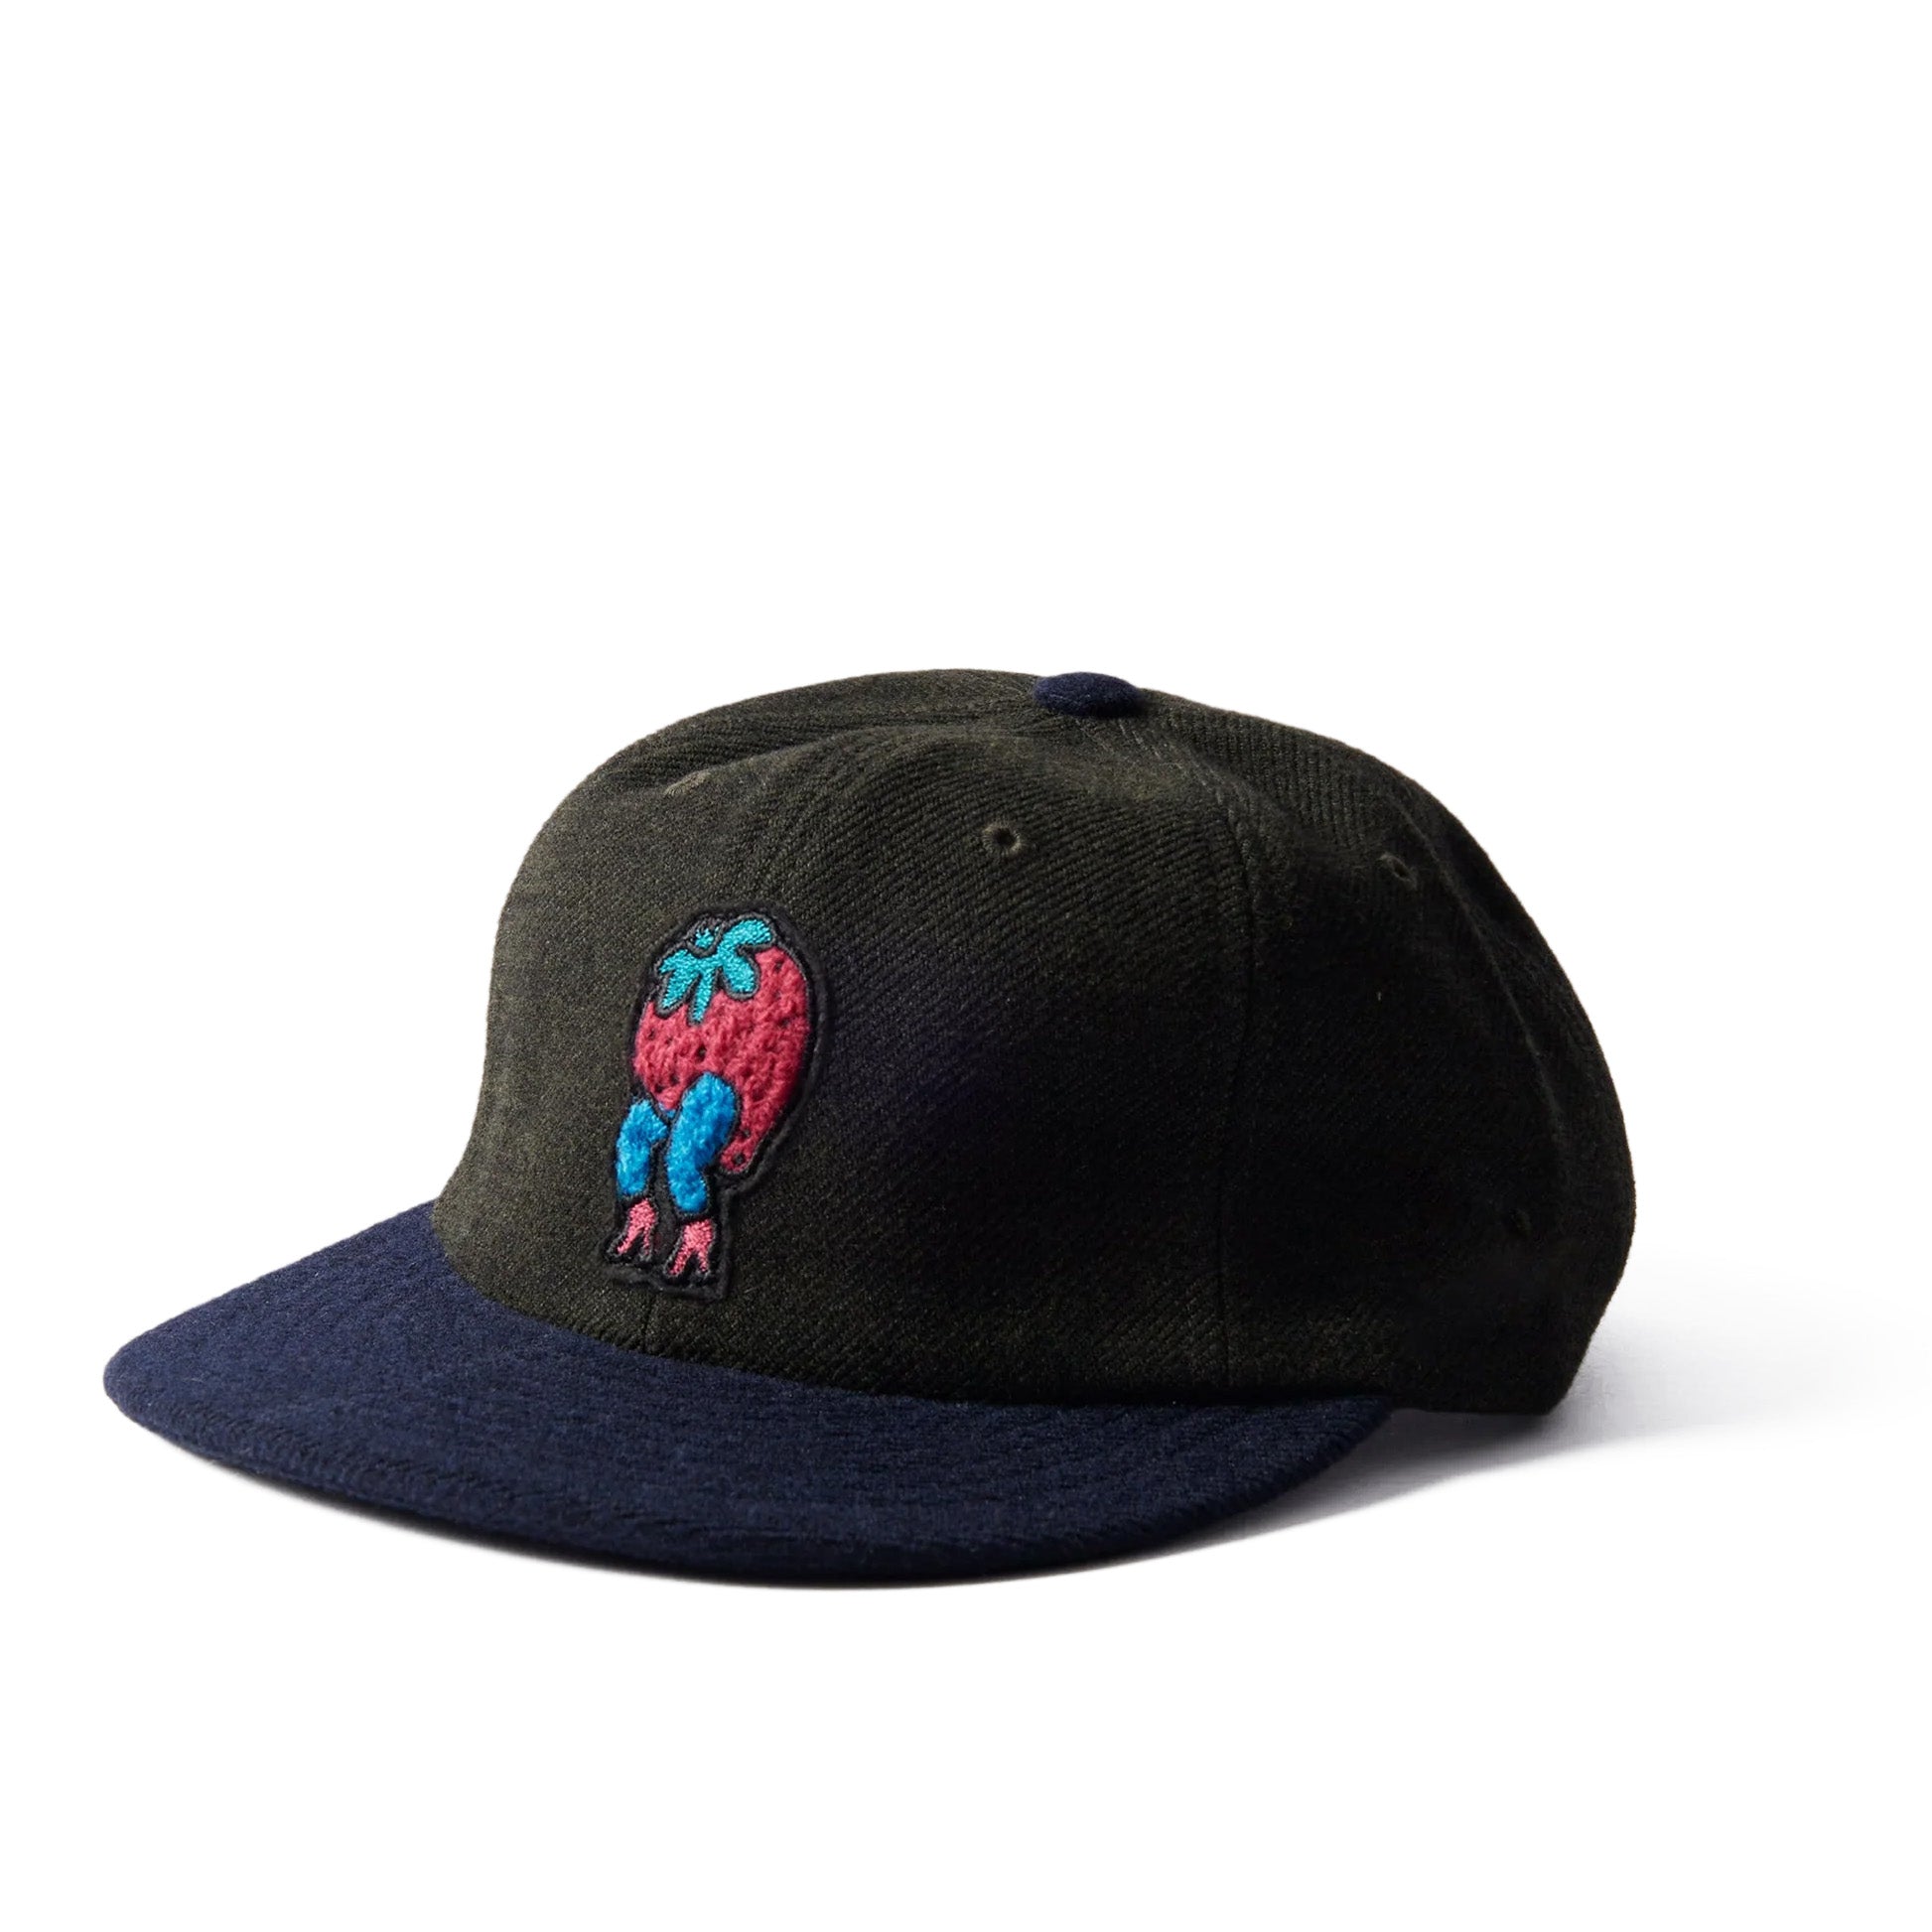 By Parra Stupid Strawberry 6 Panel Hat 'Hunter Green'